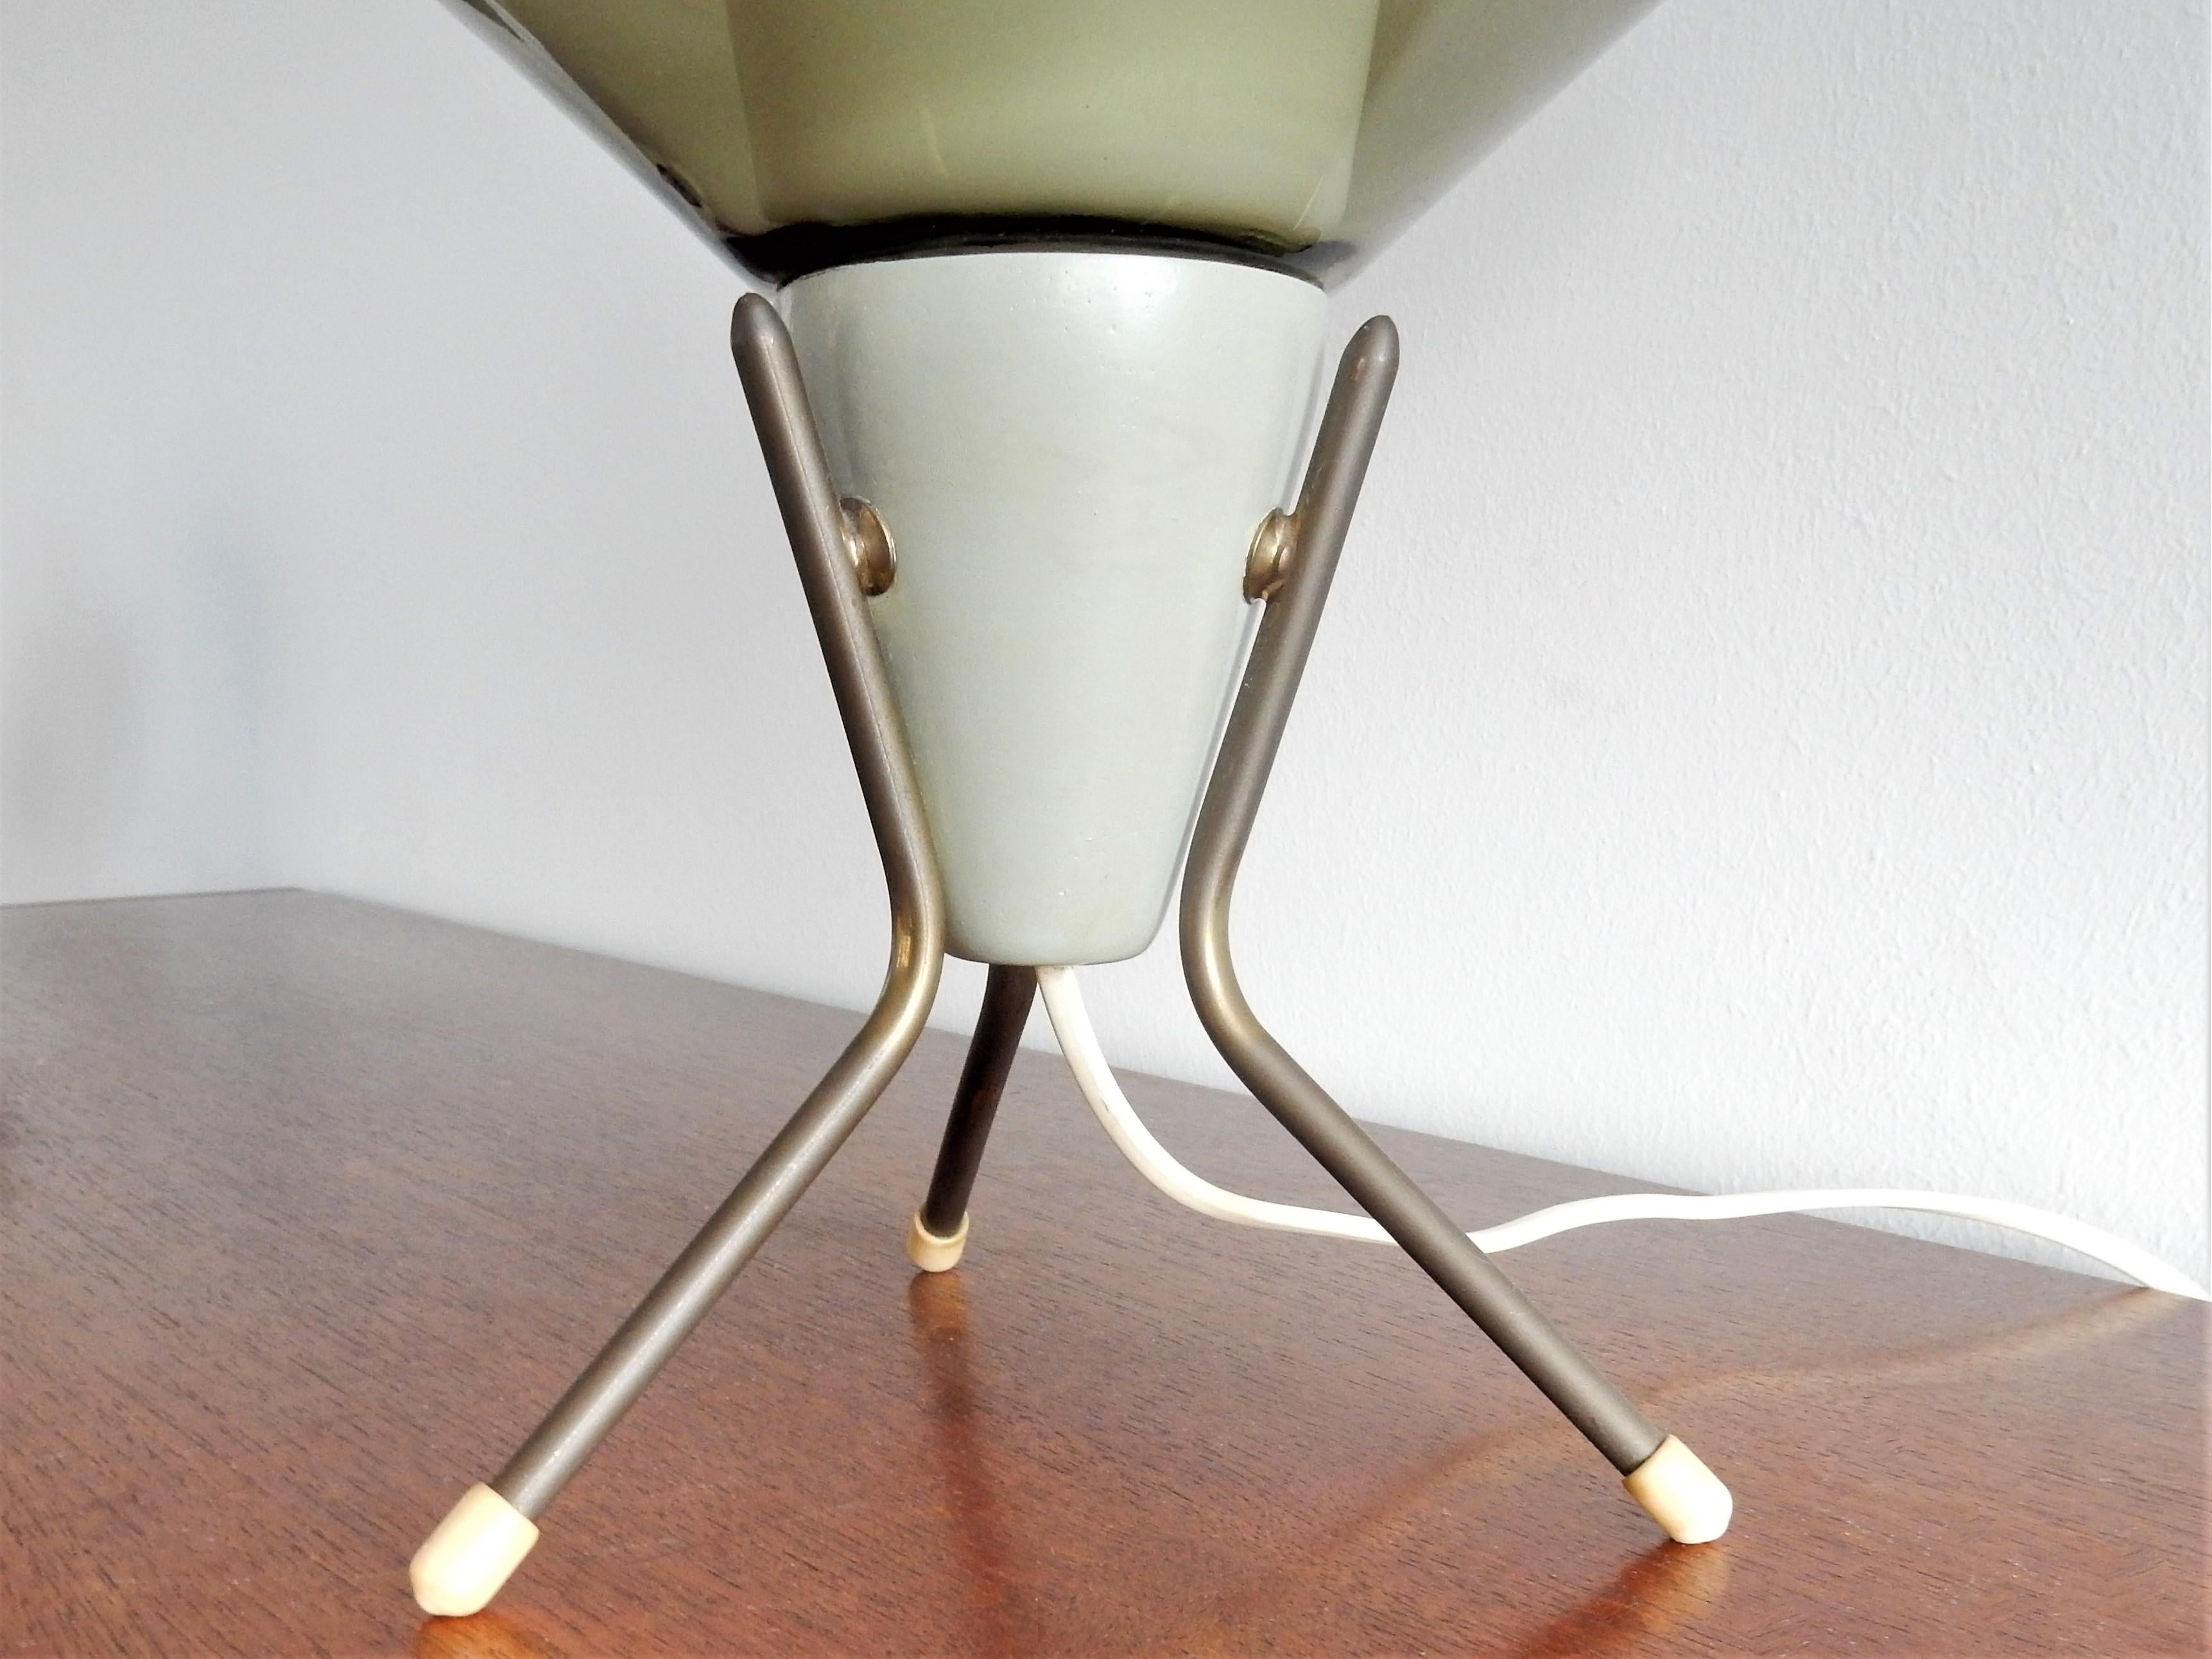 European Vintage Glass and Metal Tripod Table Lamp, 1960s